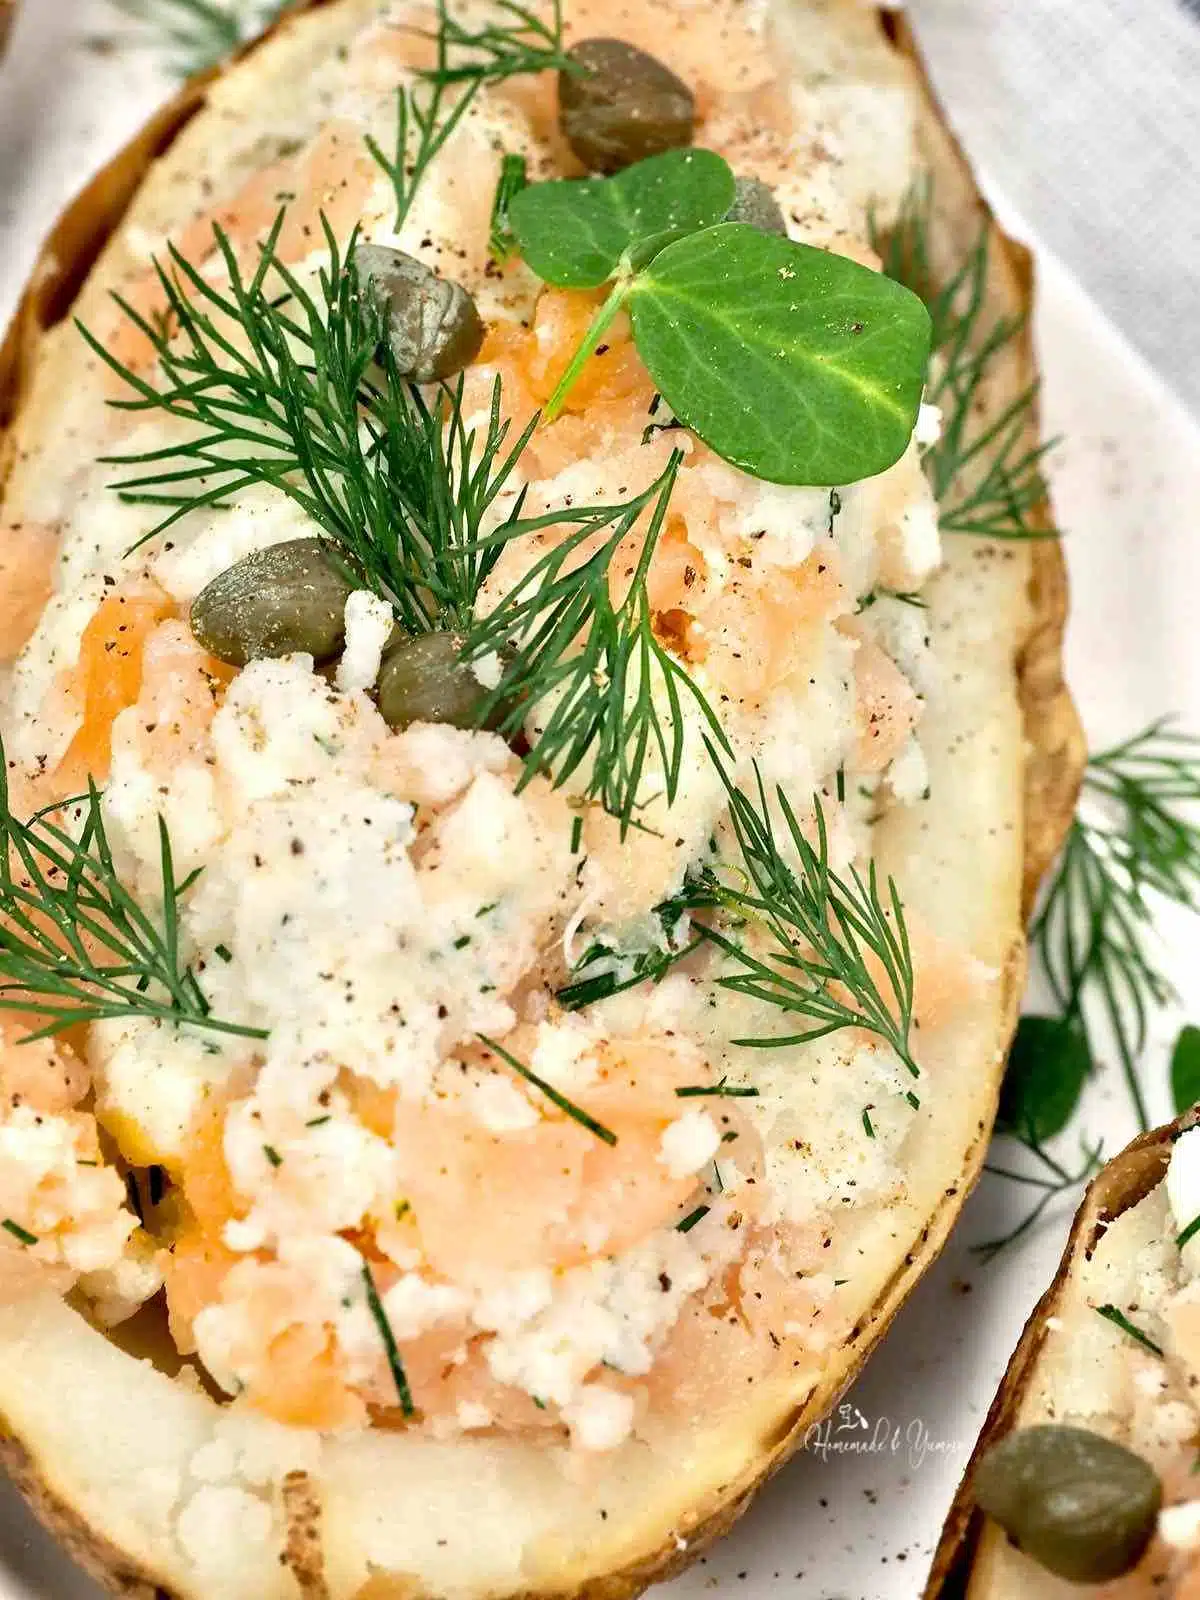 Smoked salmon and baked potato recipe is so delicious.